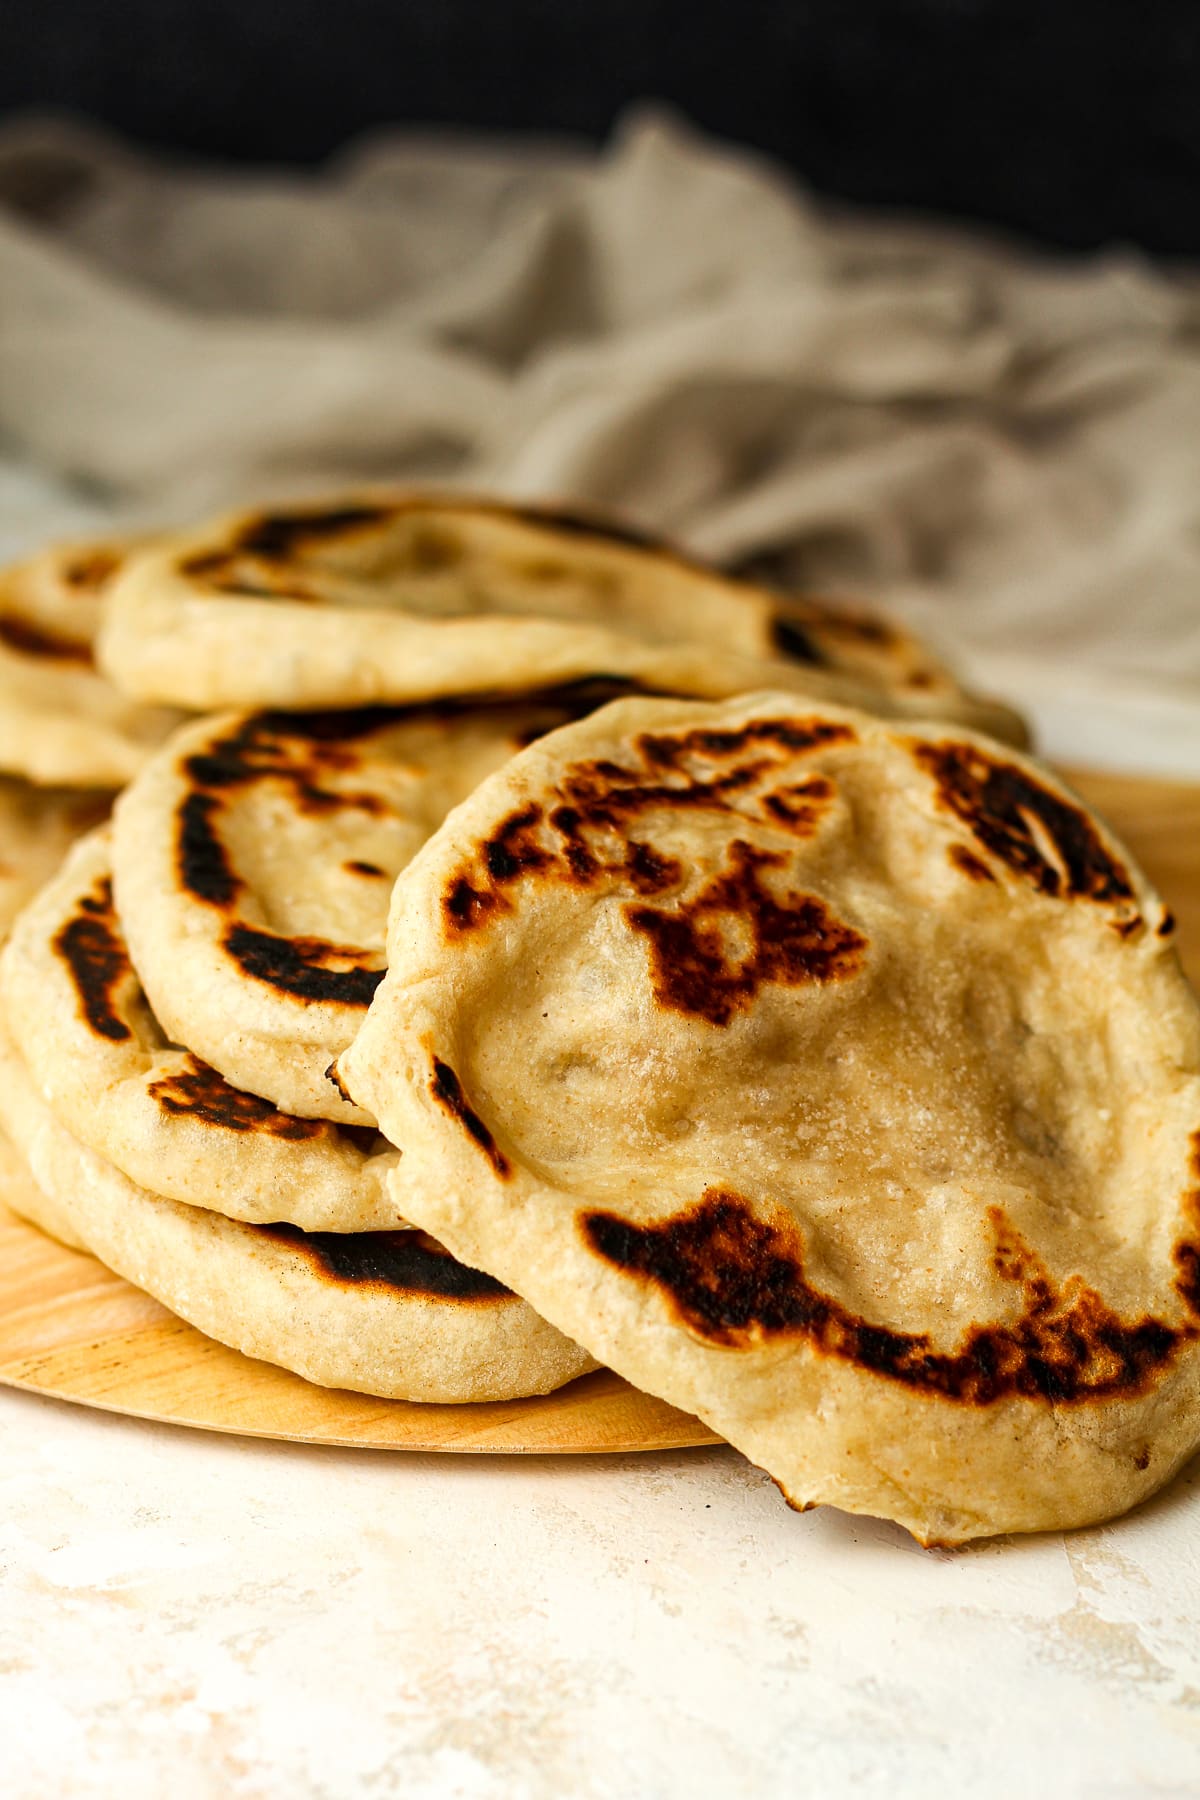 Side view of several pieces of sourdough naan with browned edges.